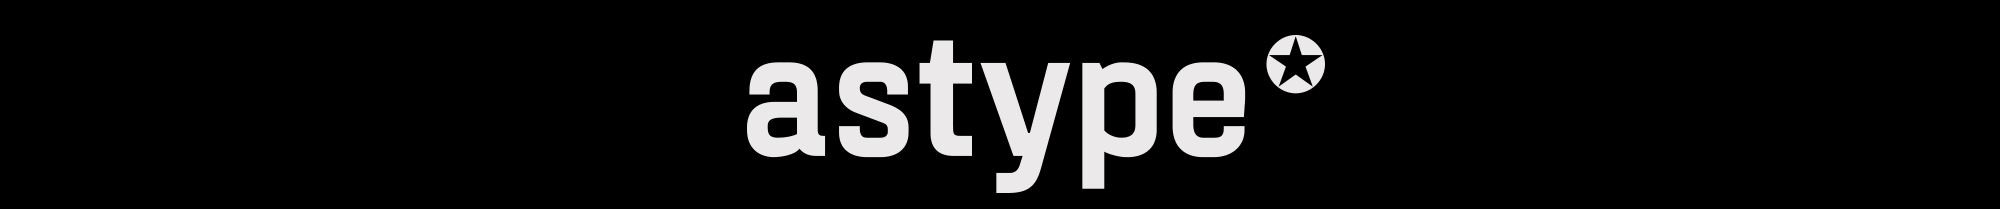 astype fonts's profile banner